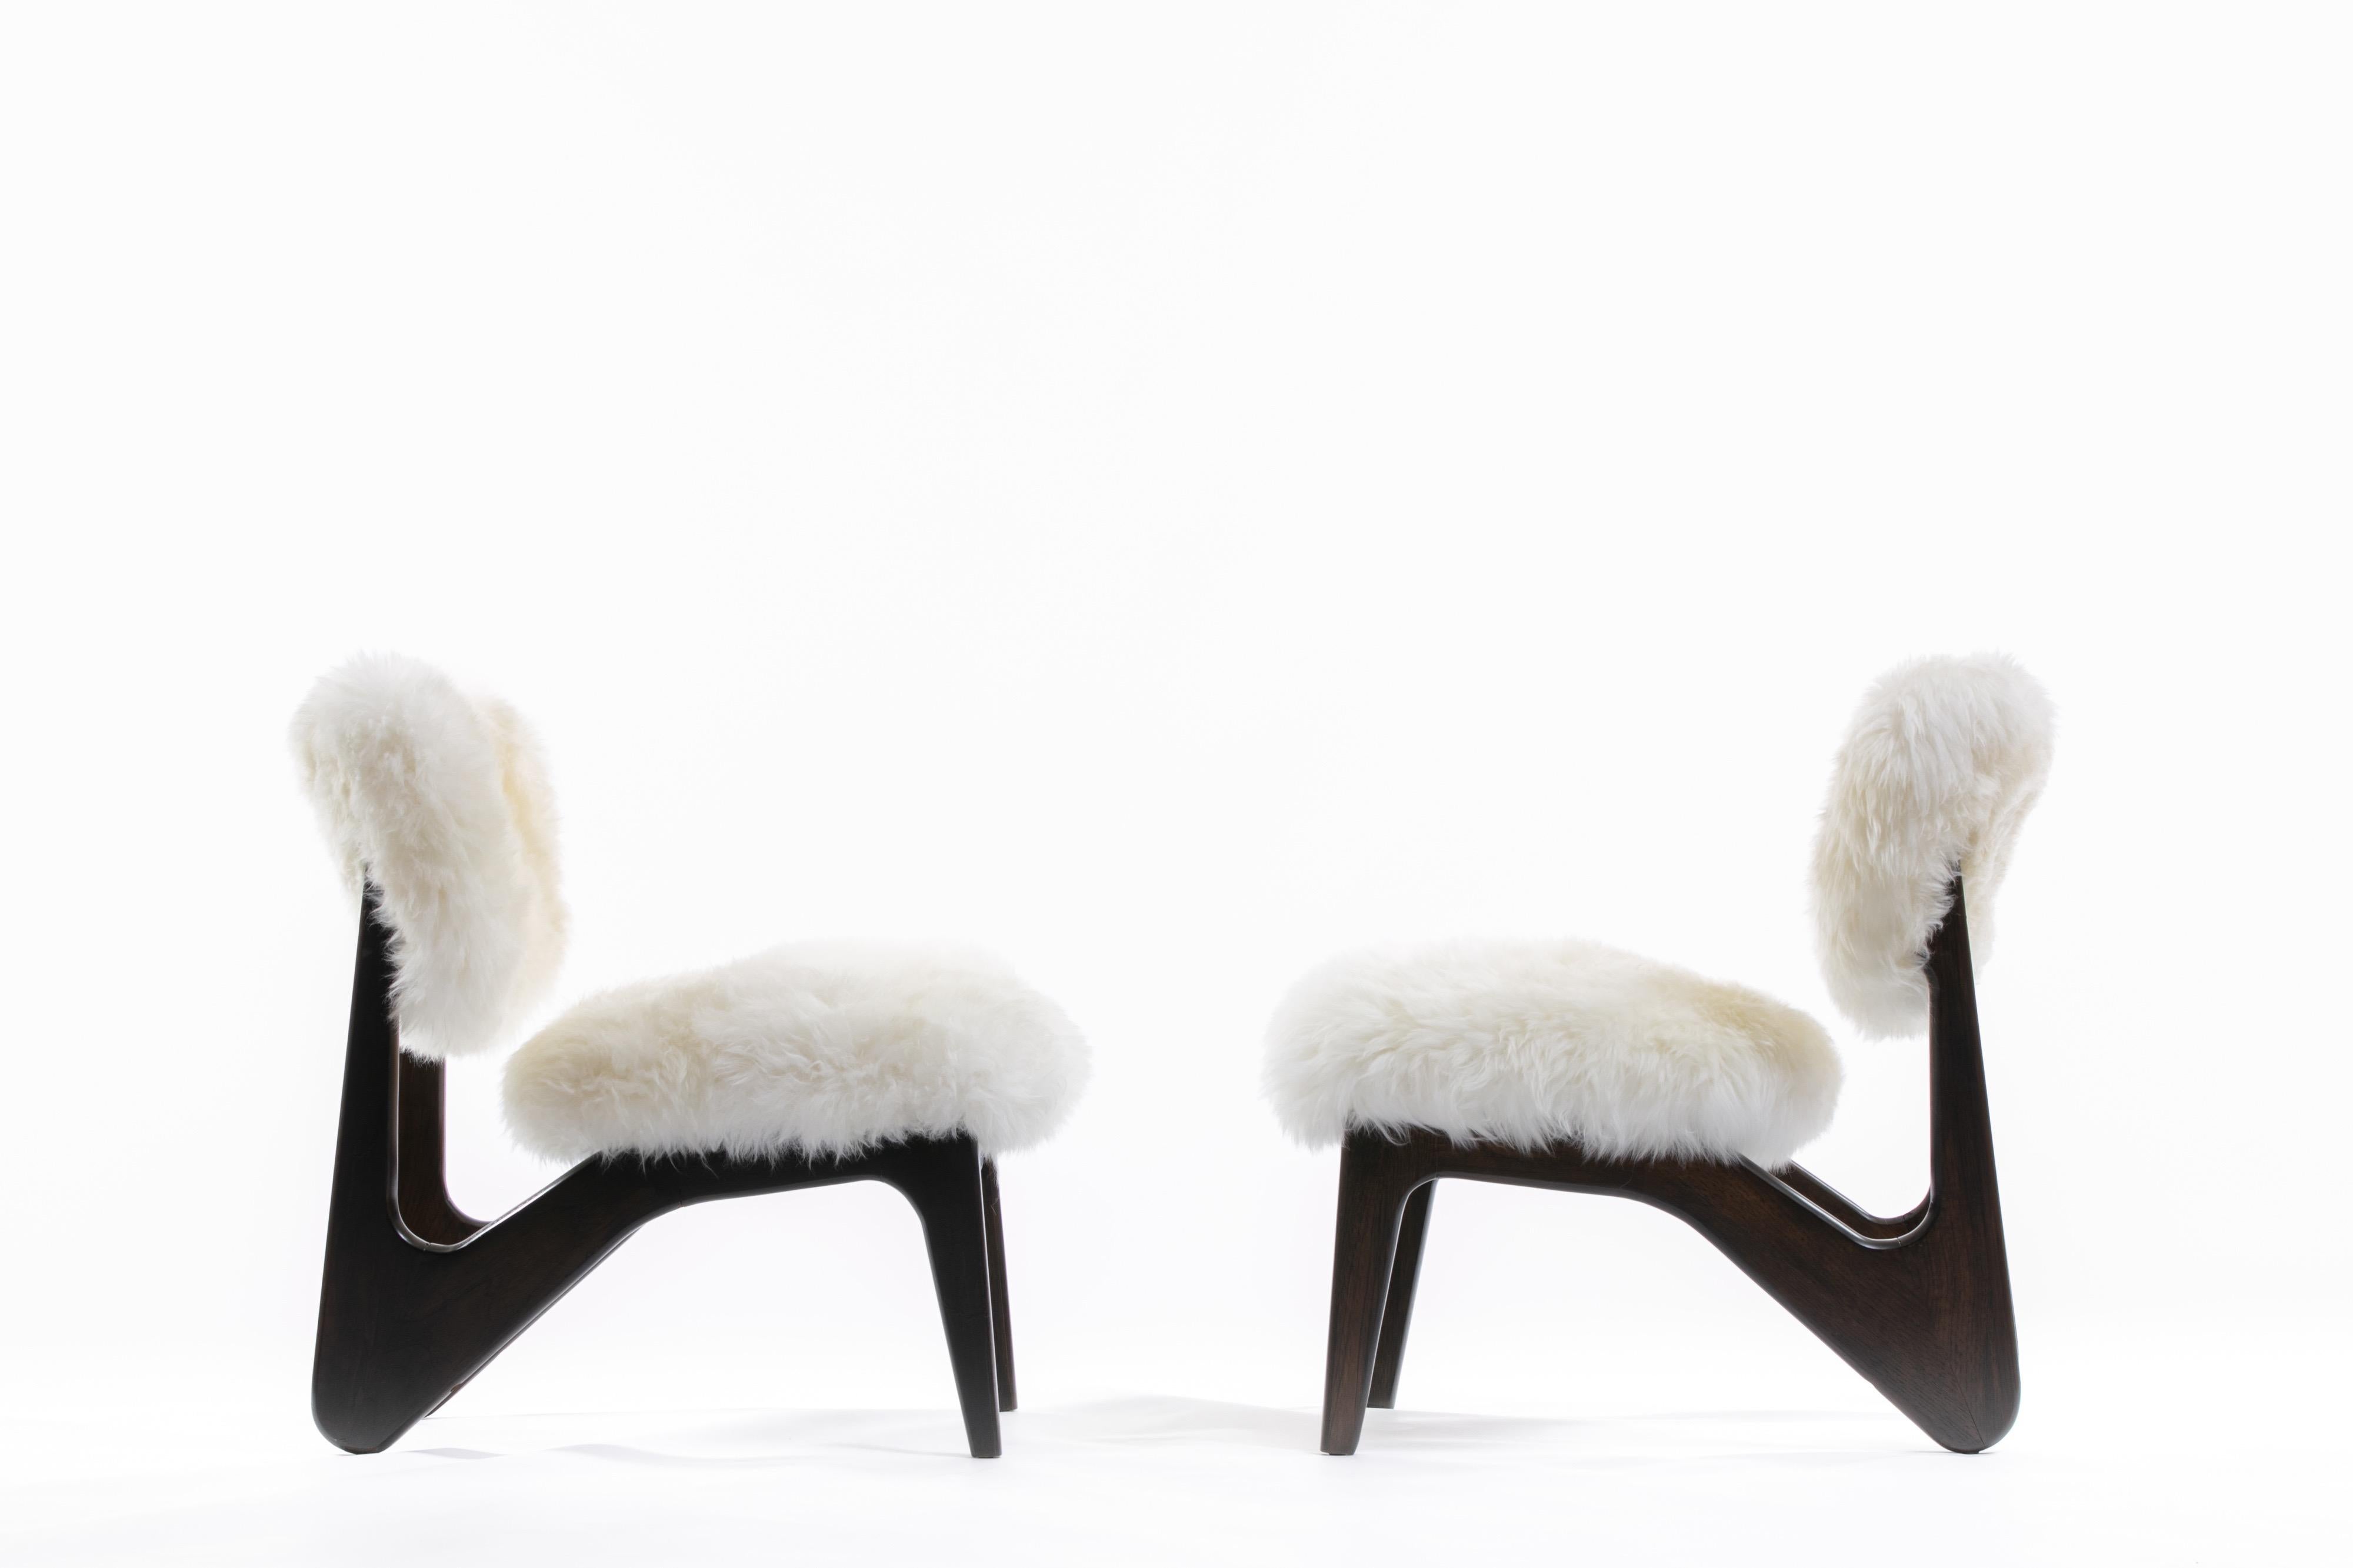 That fur, those curves! Sexy and sultry. We are enamored with these sculptural walnut slipper chairs. Newly reupholstered in lavish ivory sheepskin, the pair of chairs begs for attention and enjoyment. The walnut has been expertly refinished.